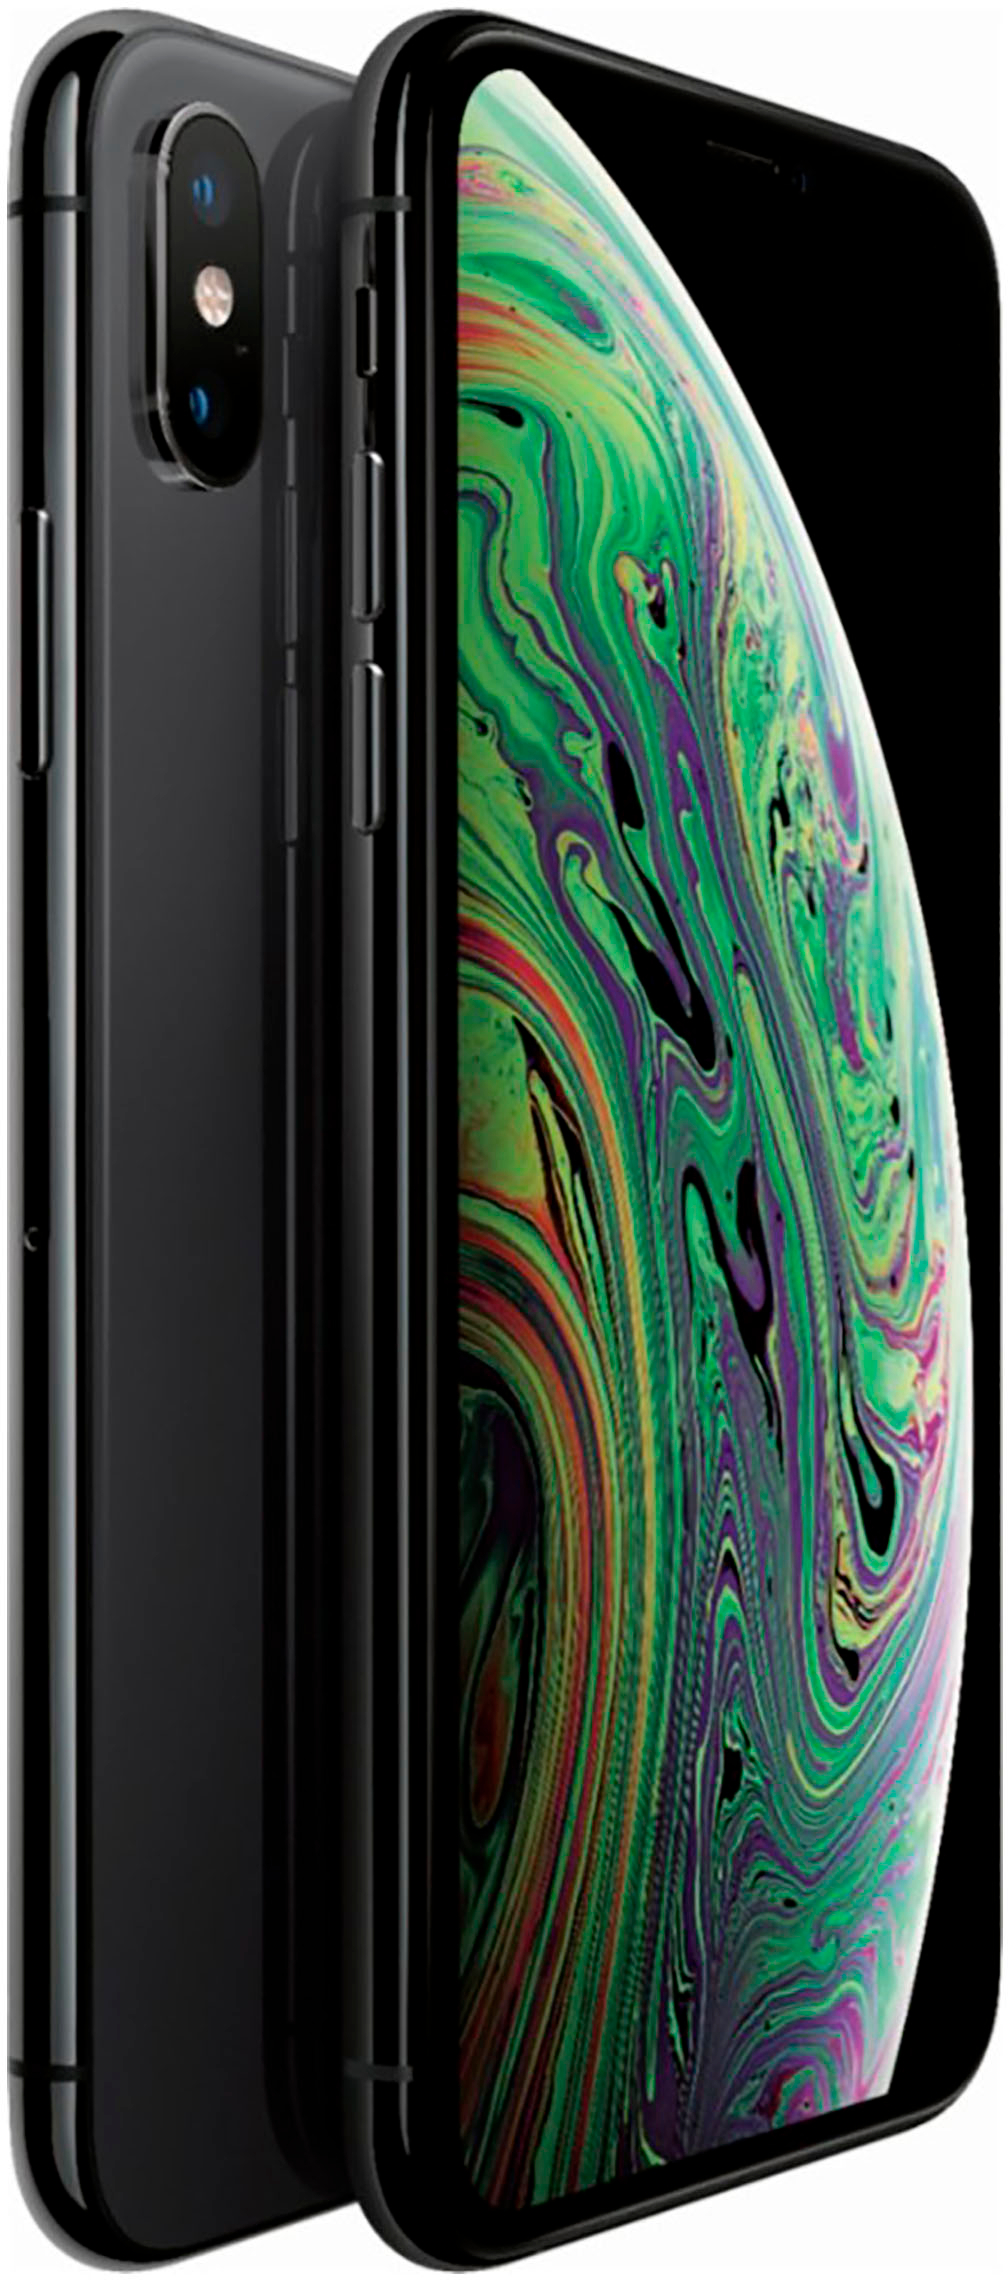 Apple Pre-Owned iPhone XS 64GB (Unlocked) Space Gray XS-64GB-GRY - Best Buy